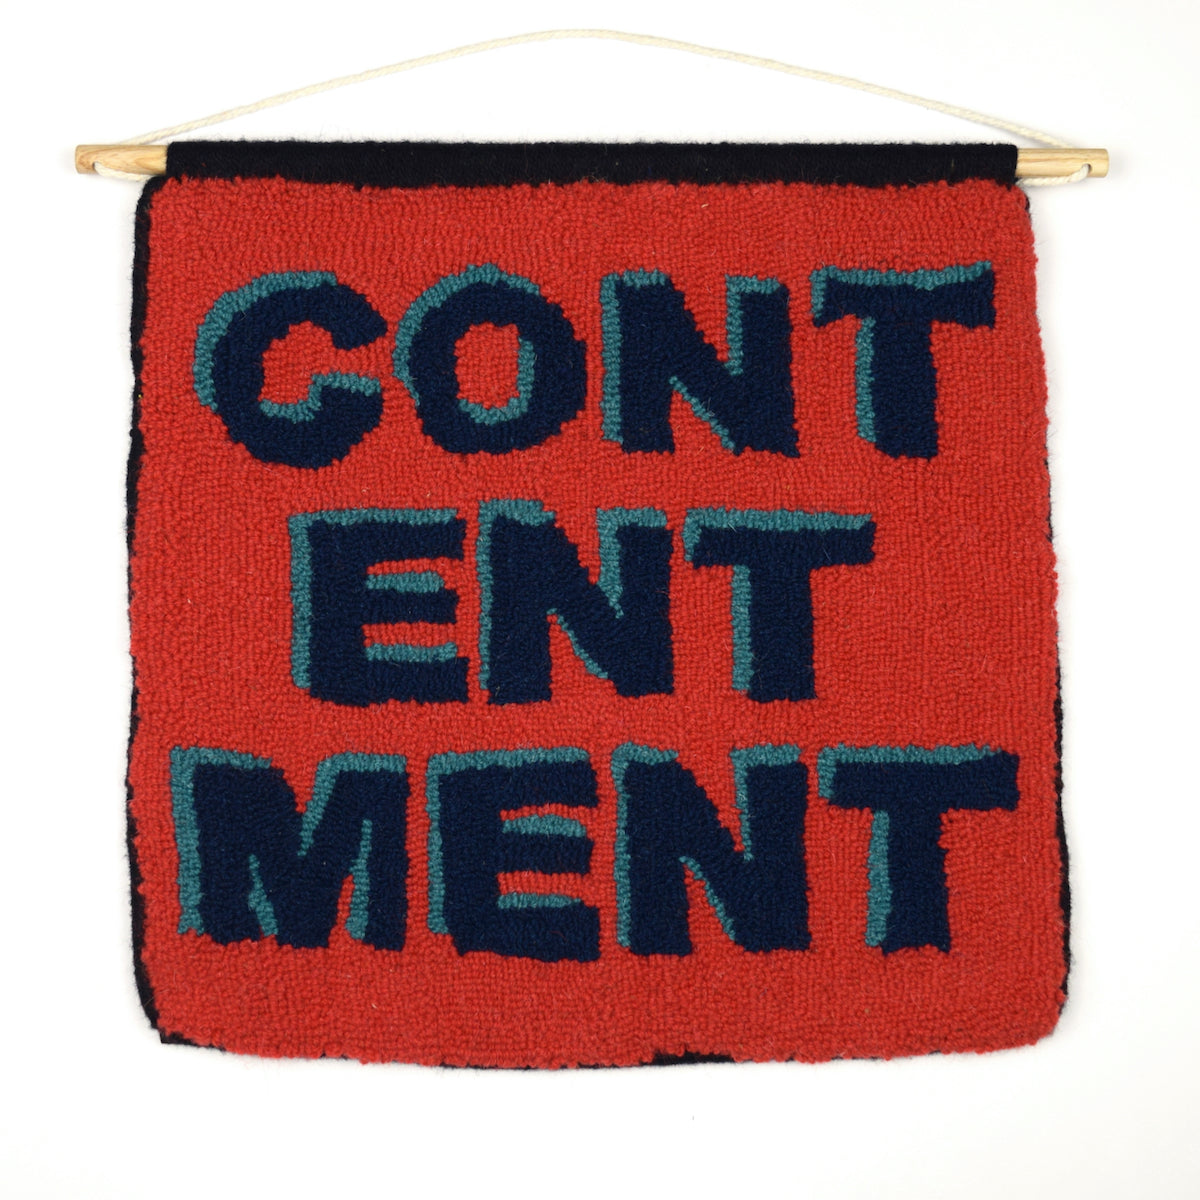 Loop pile Wall Hanging with the word CONTENTMENT in 3D typography. Made using reclaimed yarn, with a red background, turquoise shadows, navy lettering and black hand bound edges